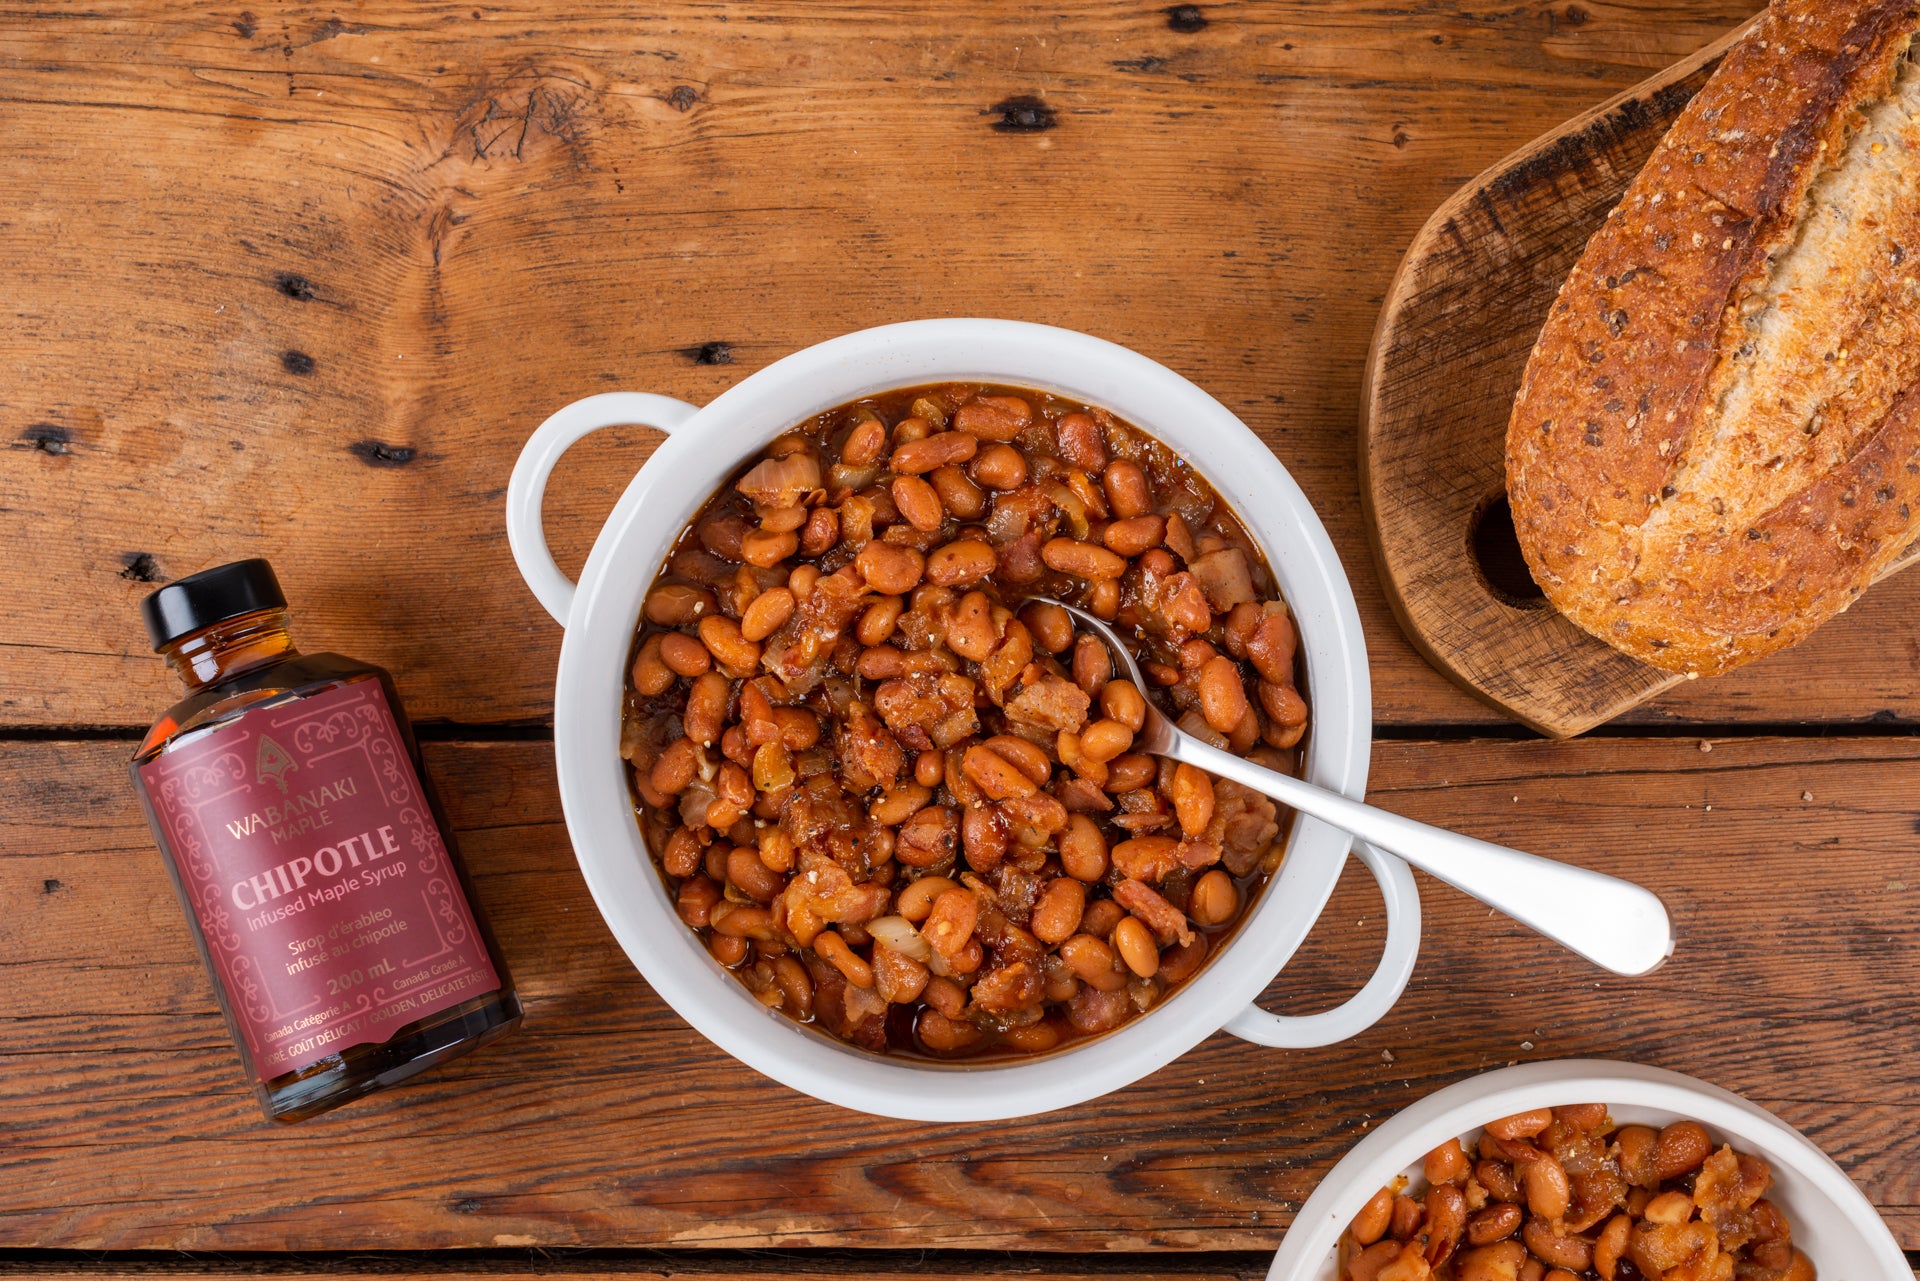 Chipotle Infused Maple Syrup Stovetop Baked Beans